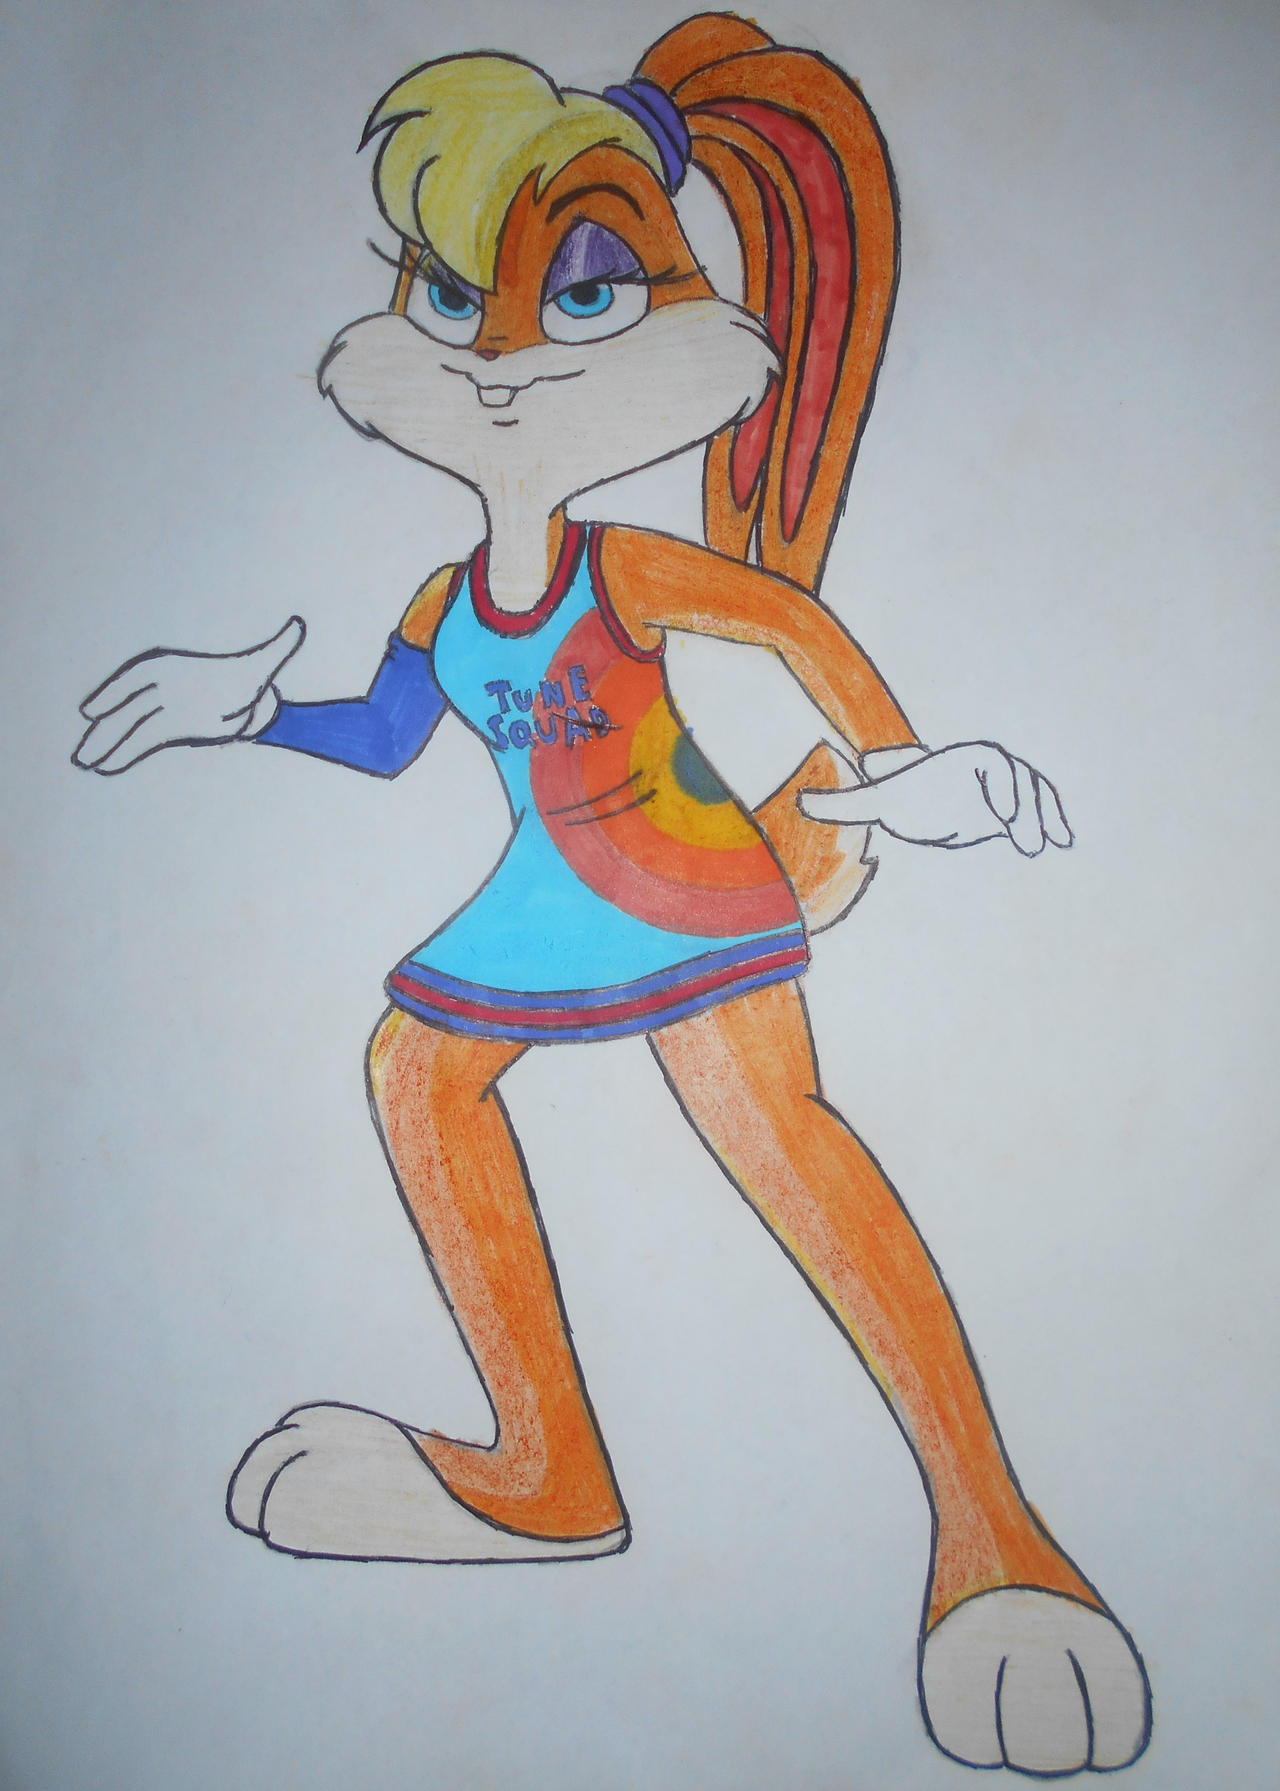 Space Jam 2 Lola Bunny New Character Design